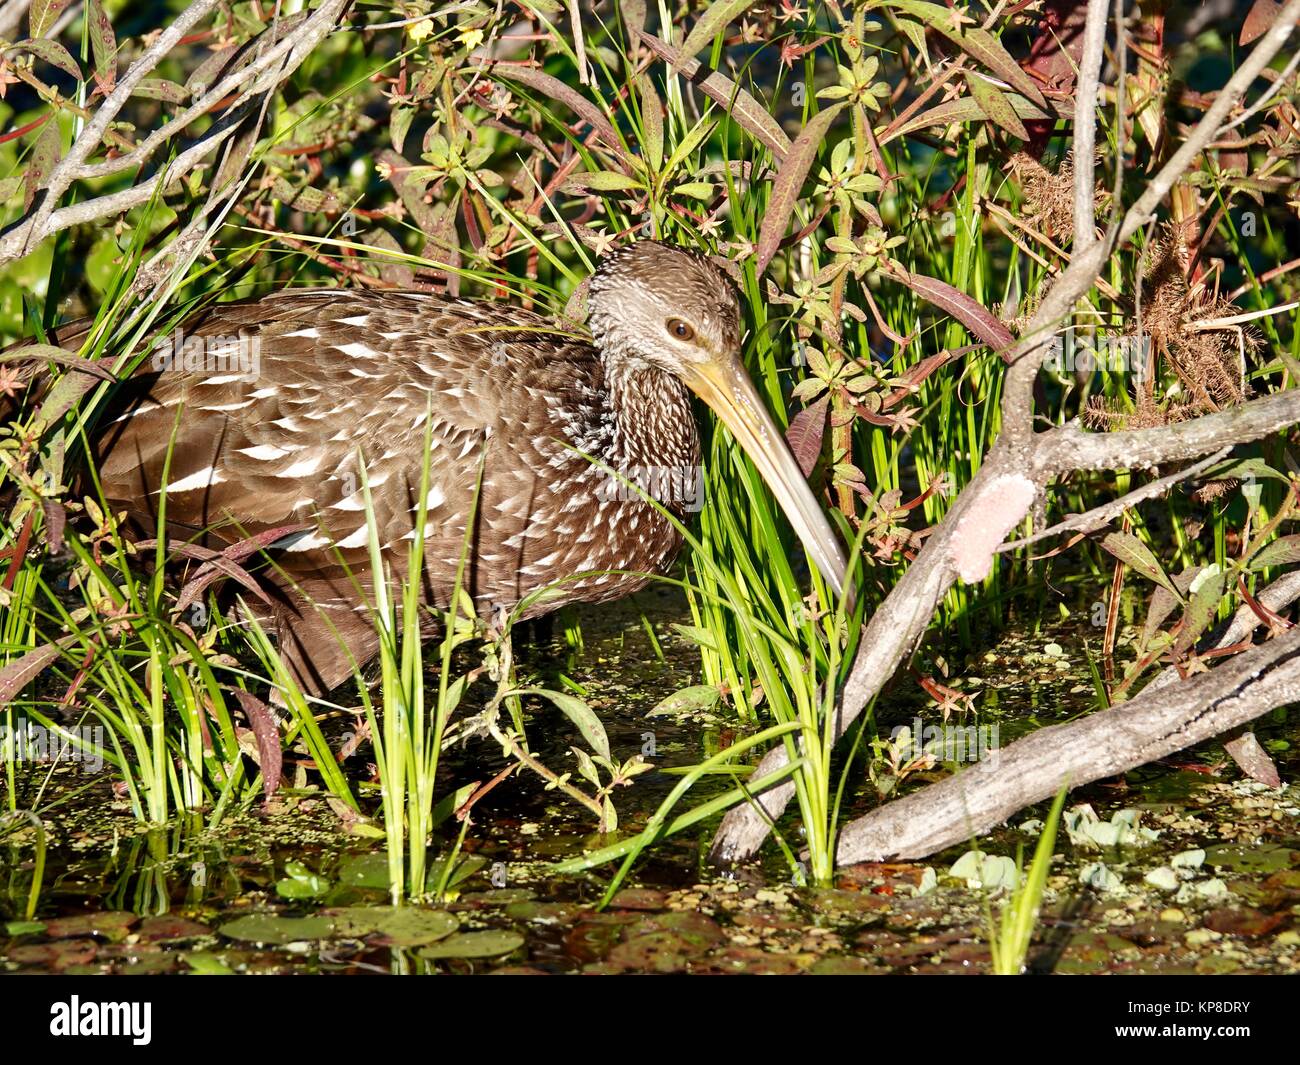 Limpkin (Aramus guarauna) foraging for applesnails in wetland, with snail eggs also pictured. Gainesville, Florida, USA. Stock Photo